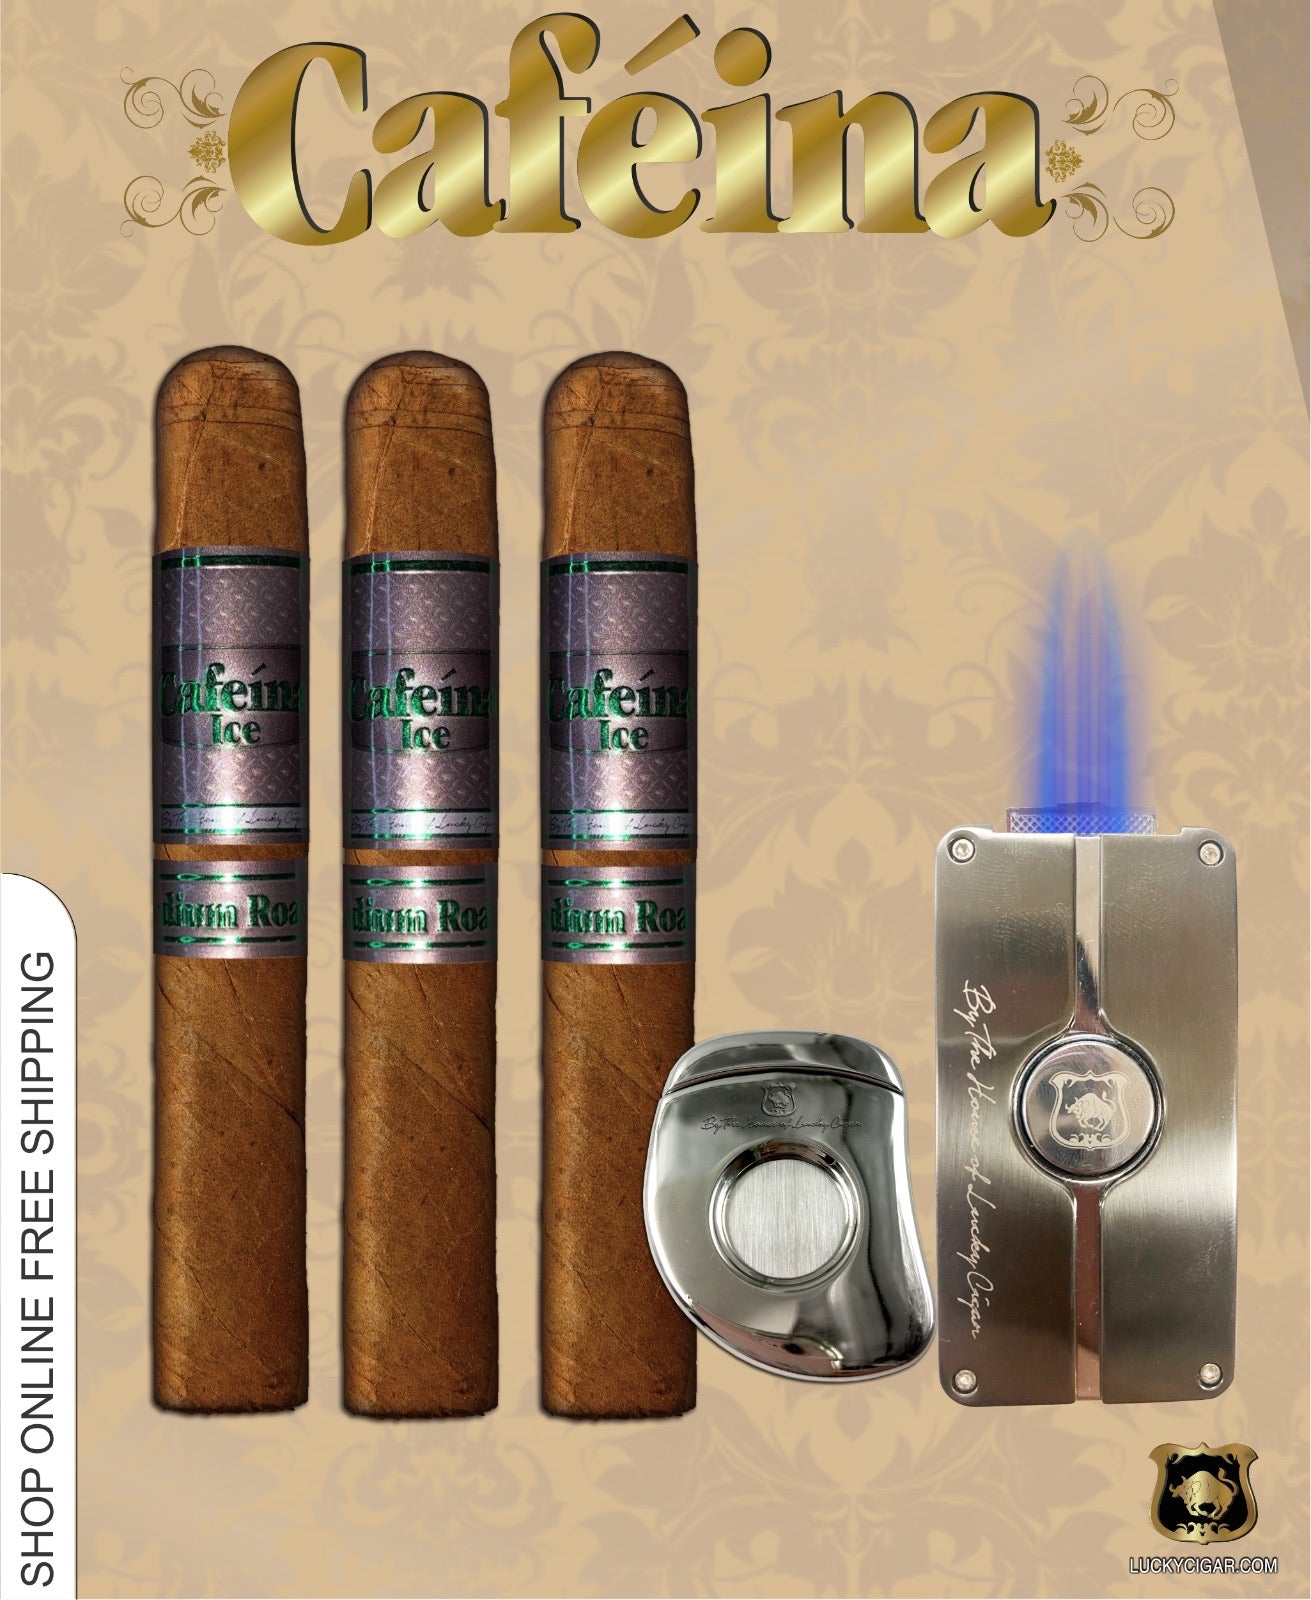 Cigar Sets: 3 Cafeina Ice Medium Roast 5.5x48 Cigars with a Torch Lighter and Eye Cutter